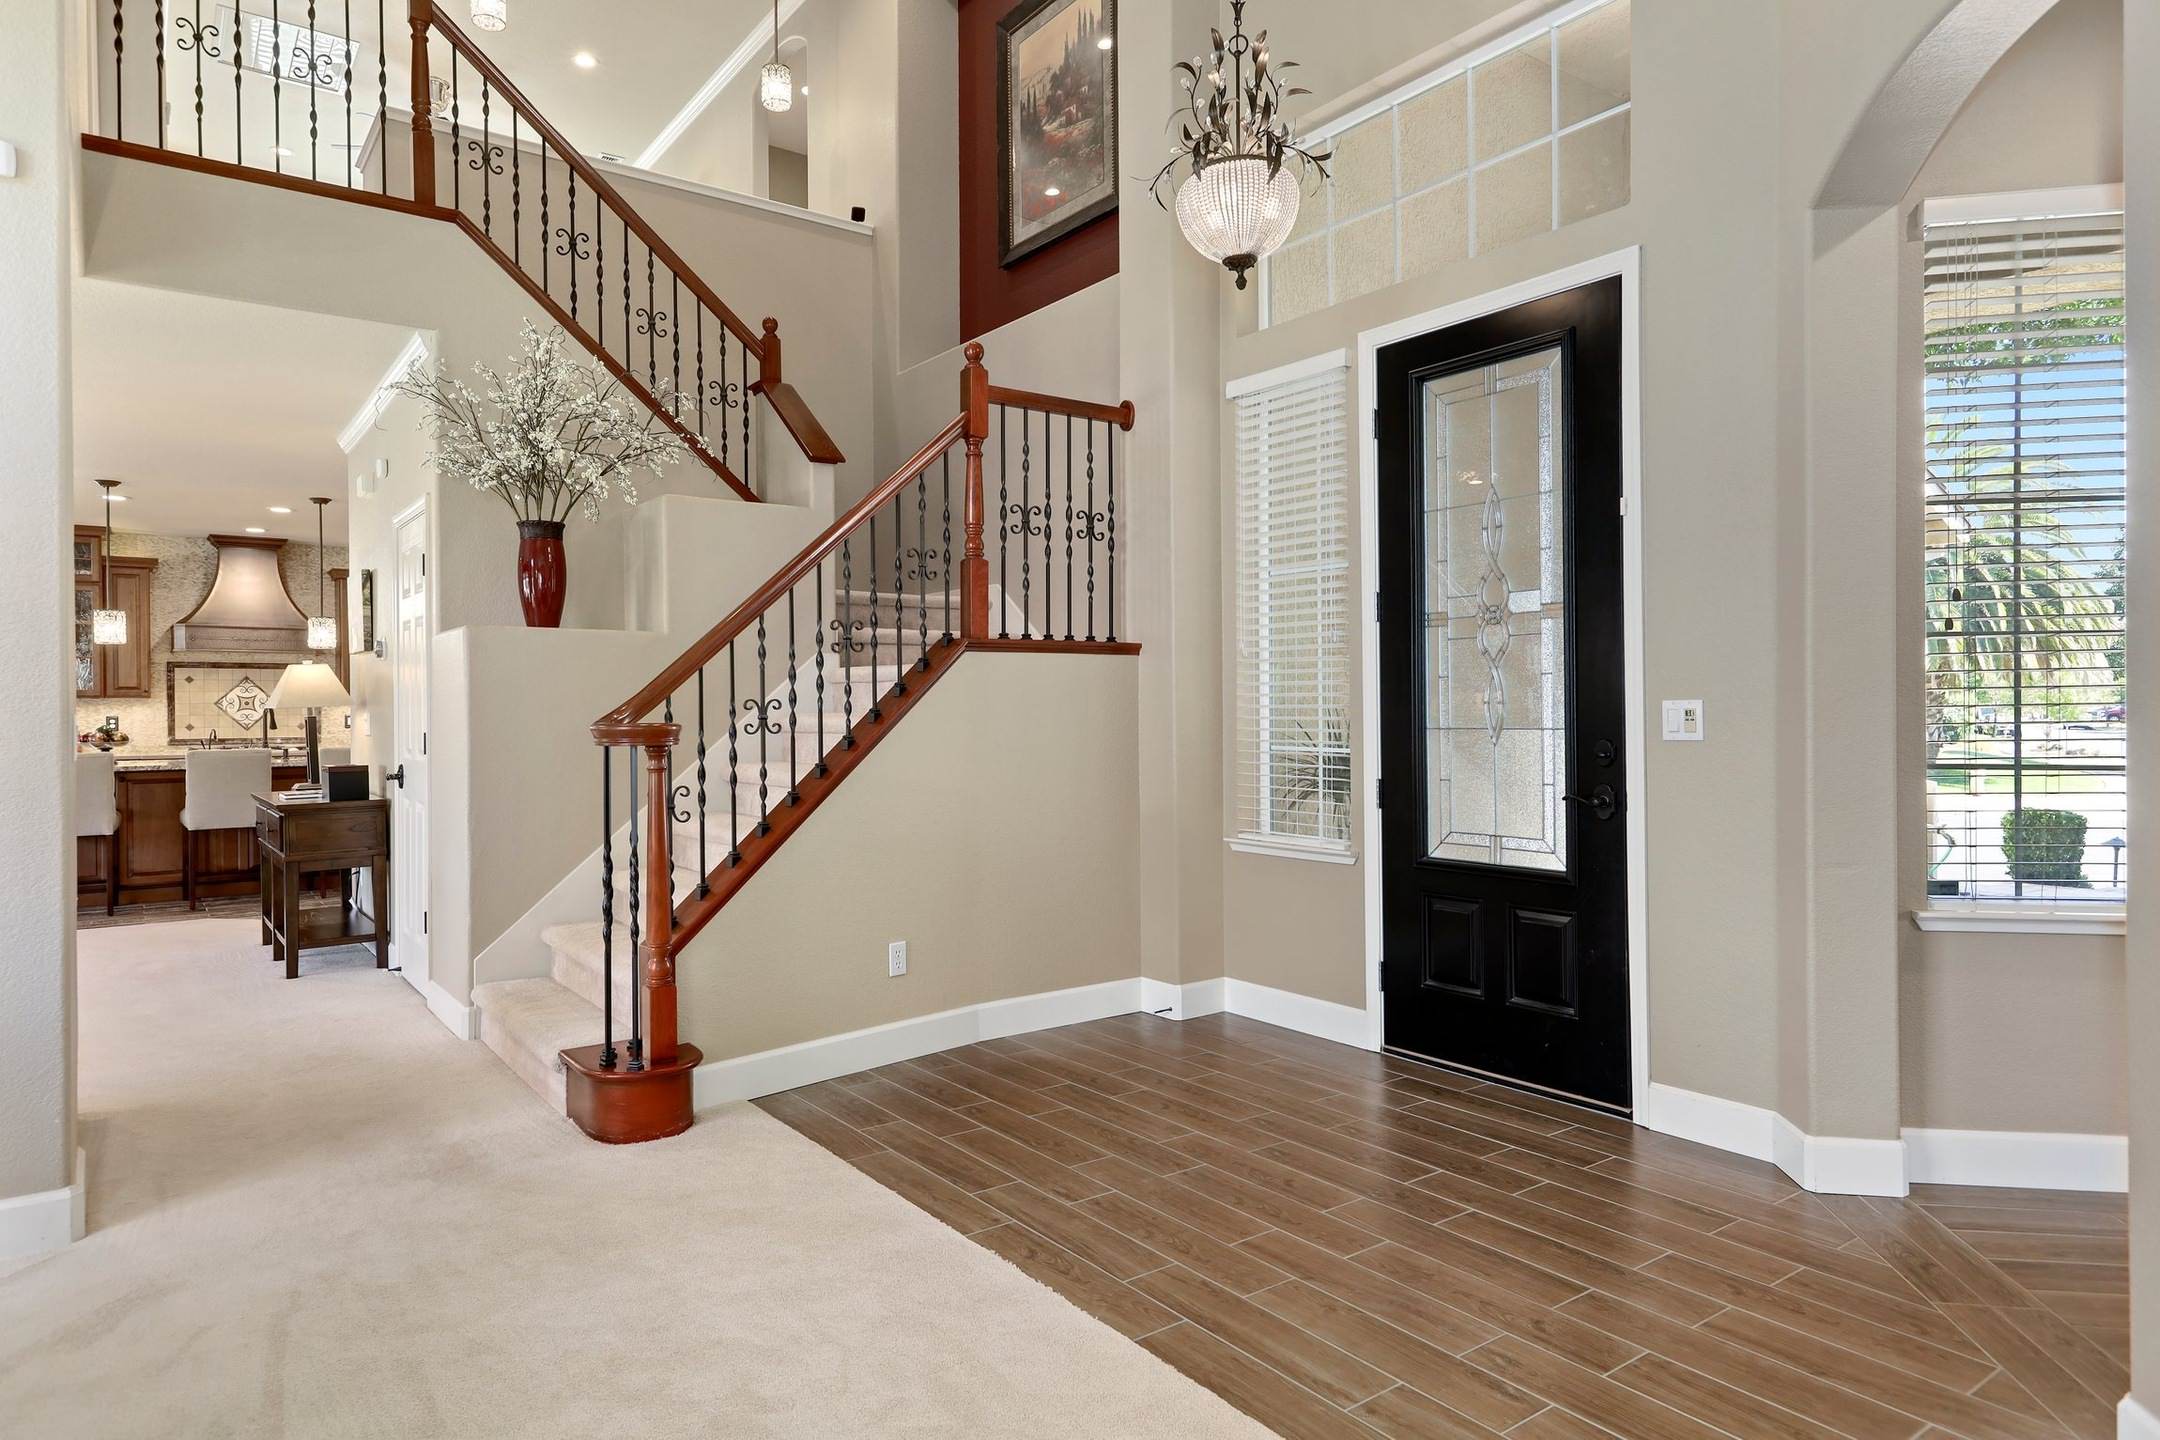 OPEN CONCEPT SHOWCASES THE UPDATED STAIRWELL, ENTRY & KITCHEN